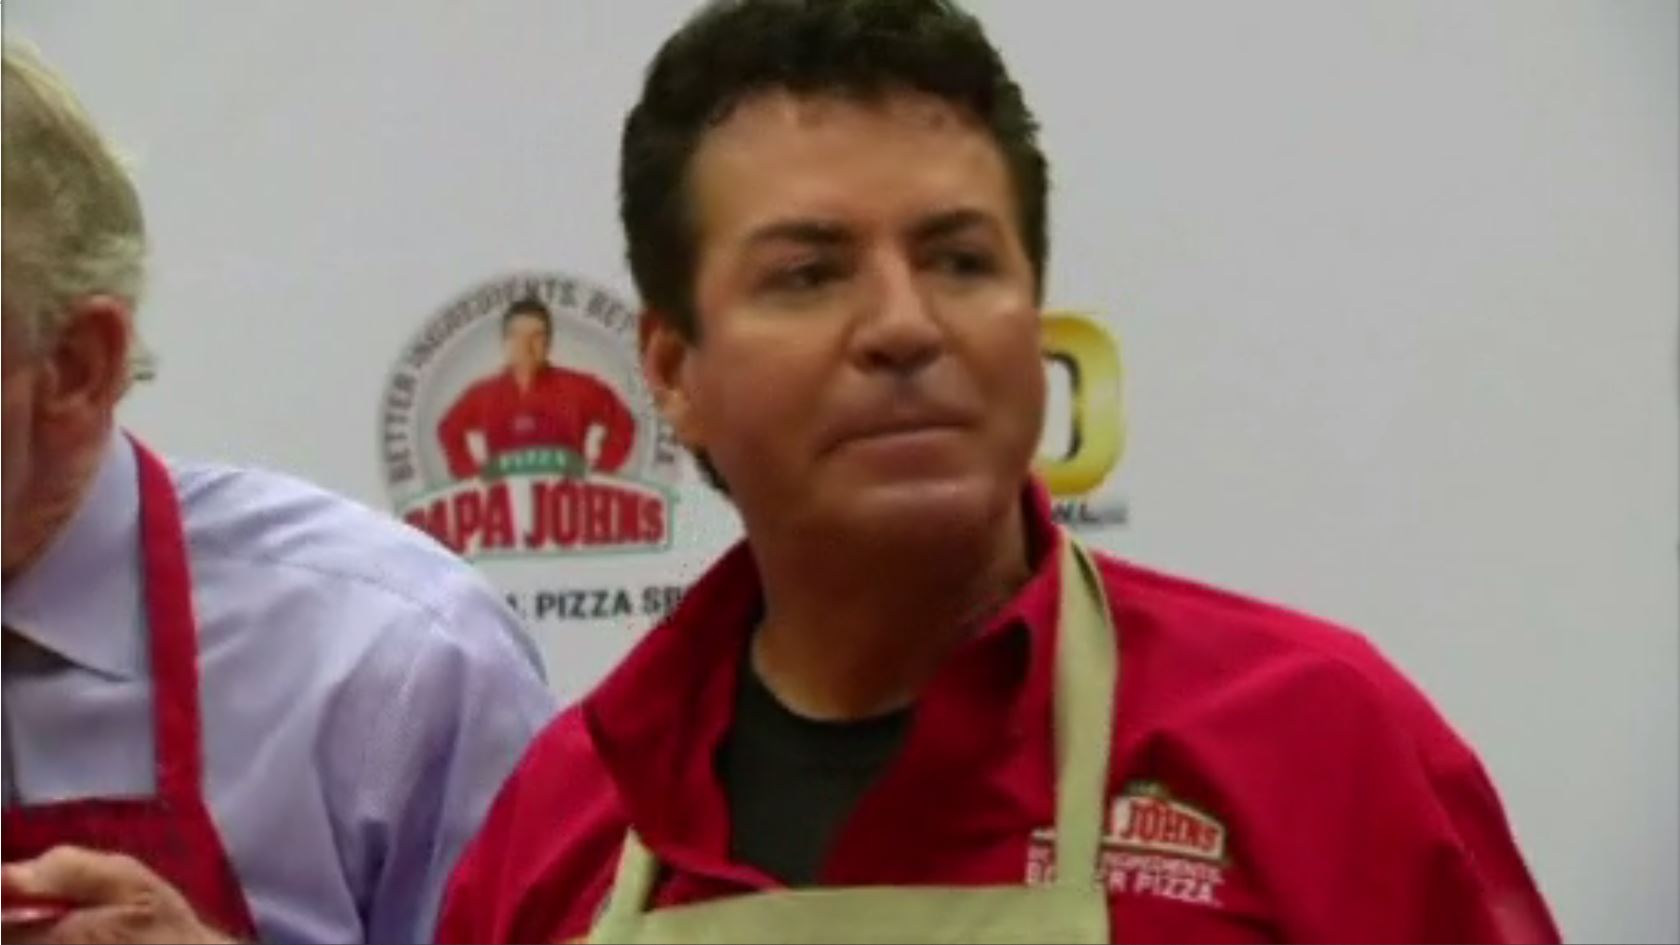 Papa johns the day of reckoning